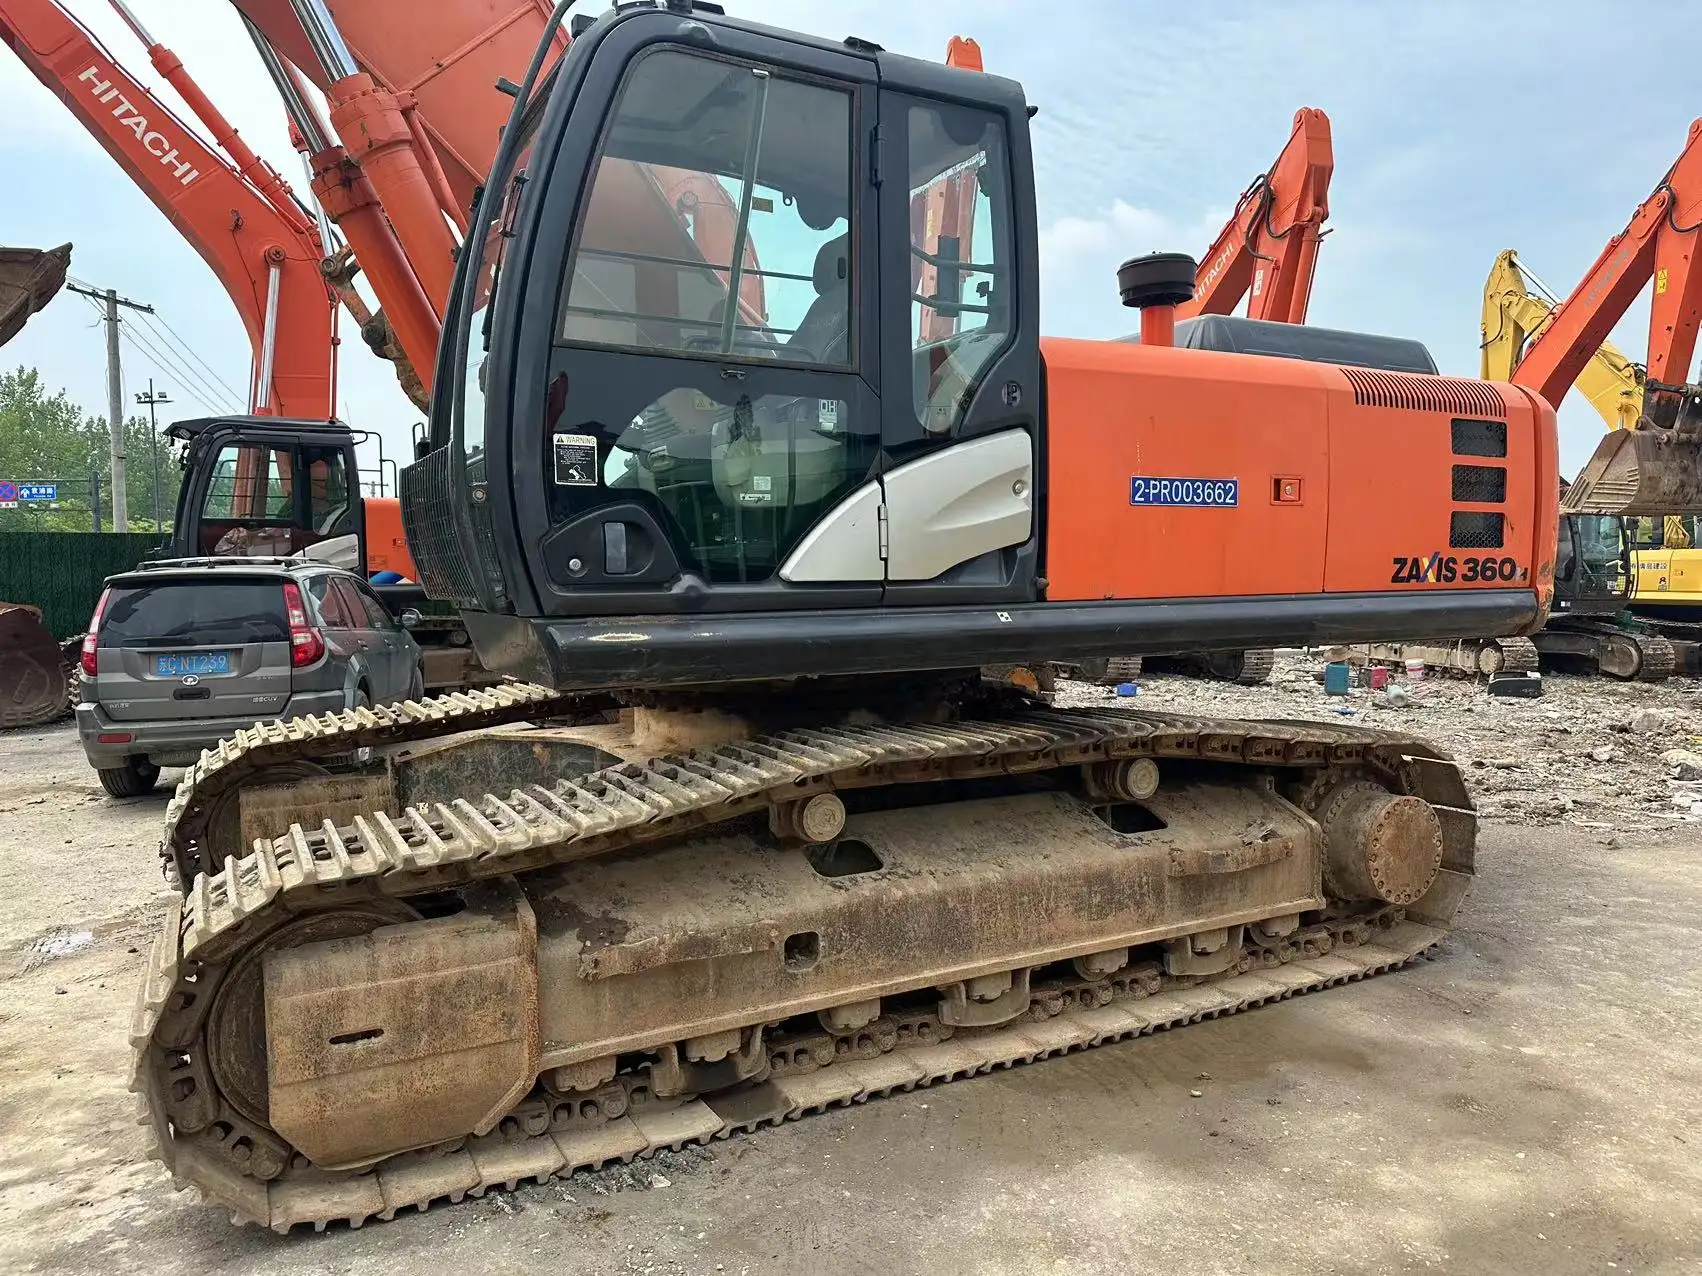 Used HITACHI ZAXIS350H-5g In Good Condition Japan Excavator Second Hand